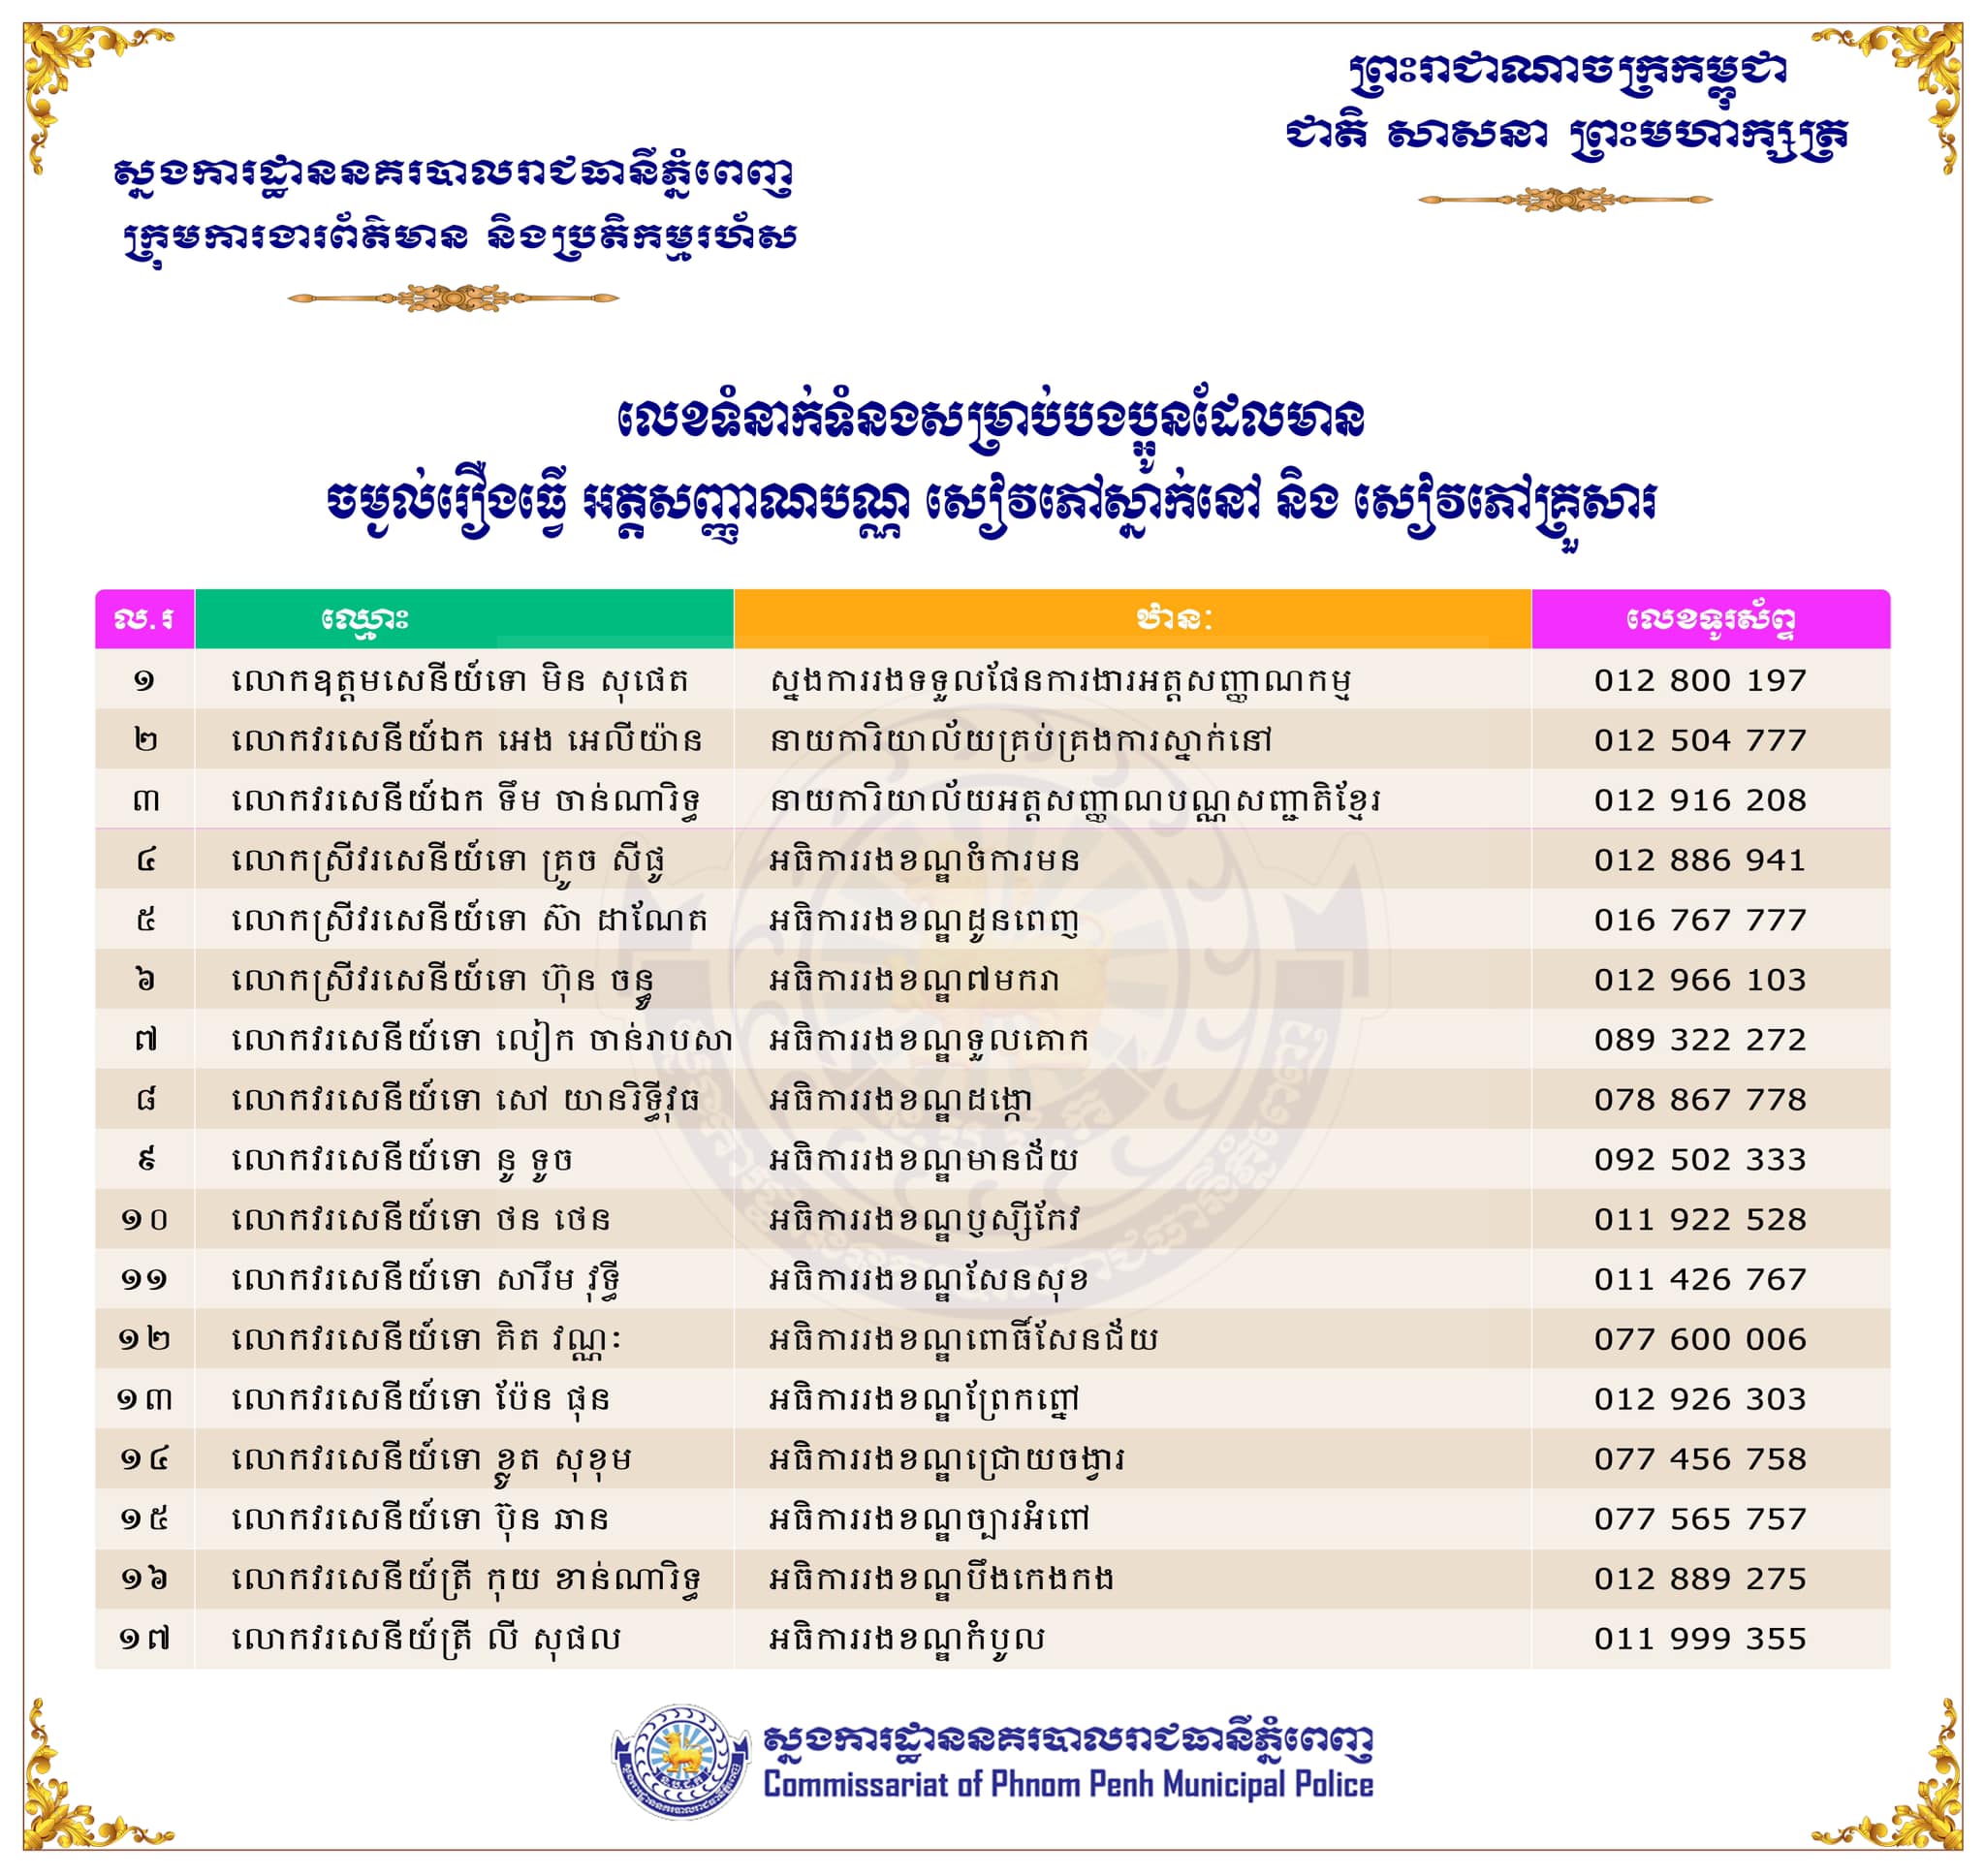 list-of-contact-numbers-for-answering-questions-on-obtaining-cambodian